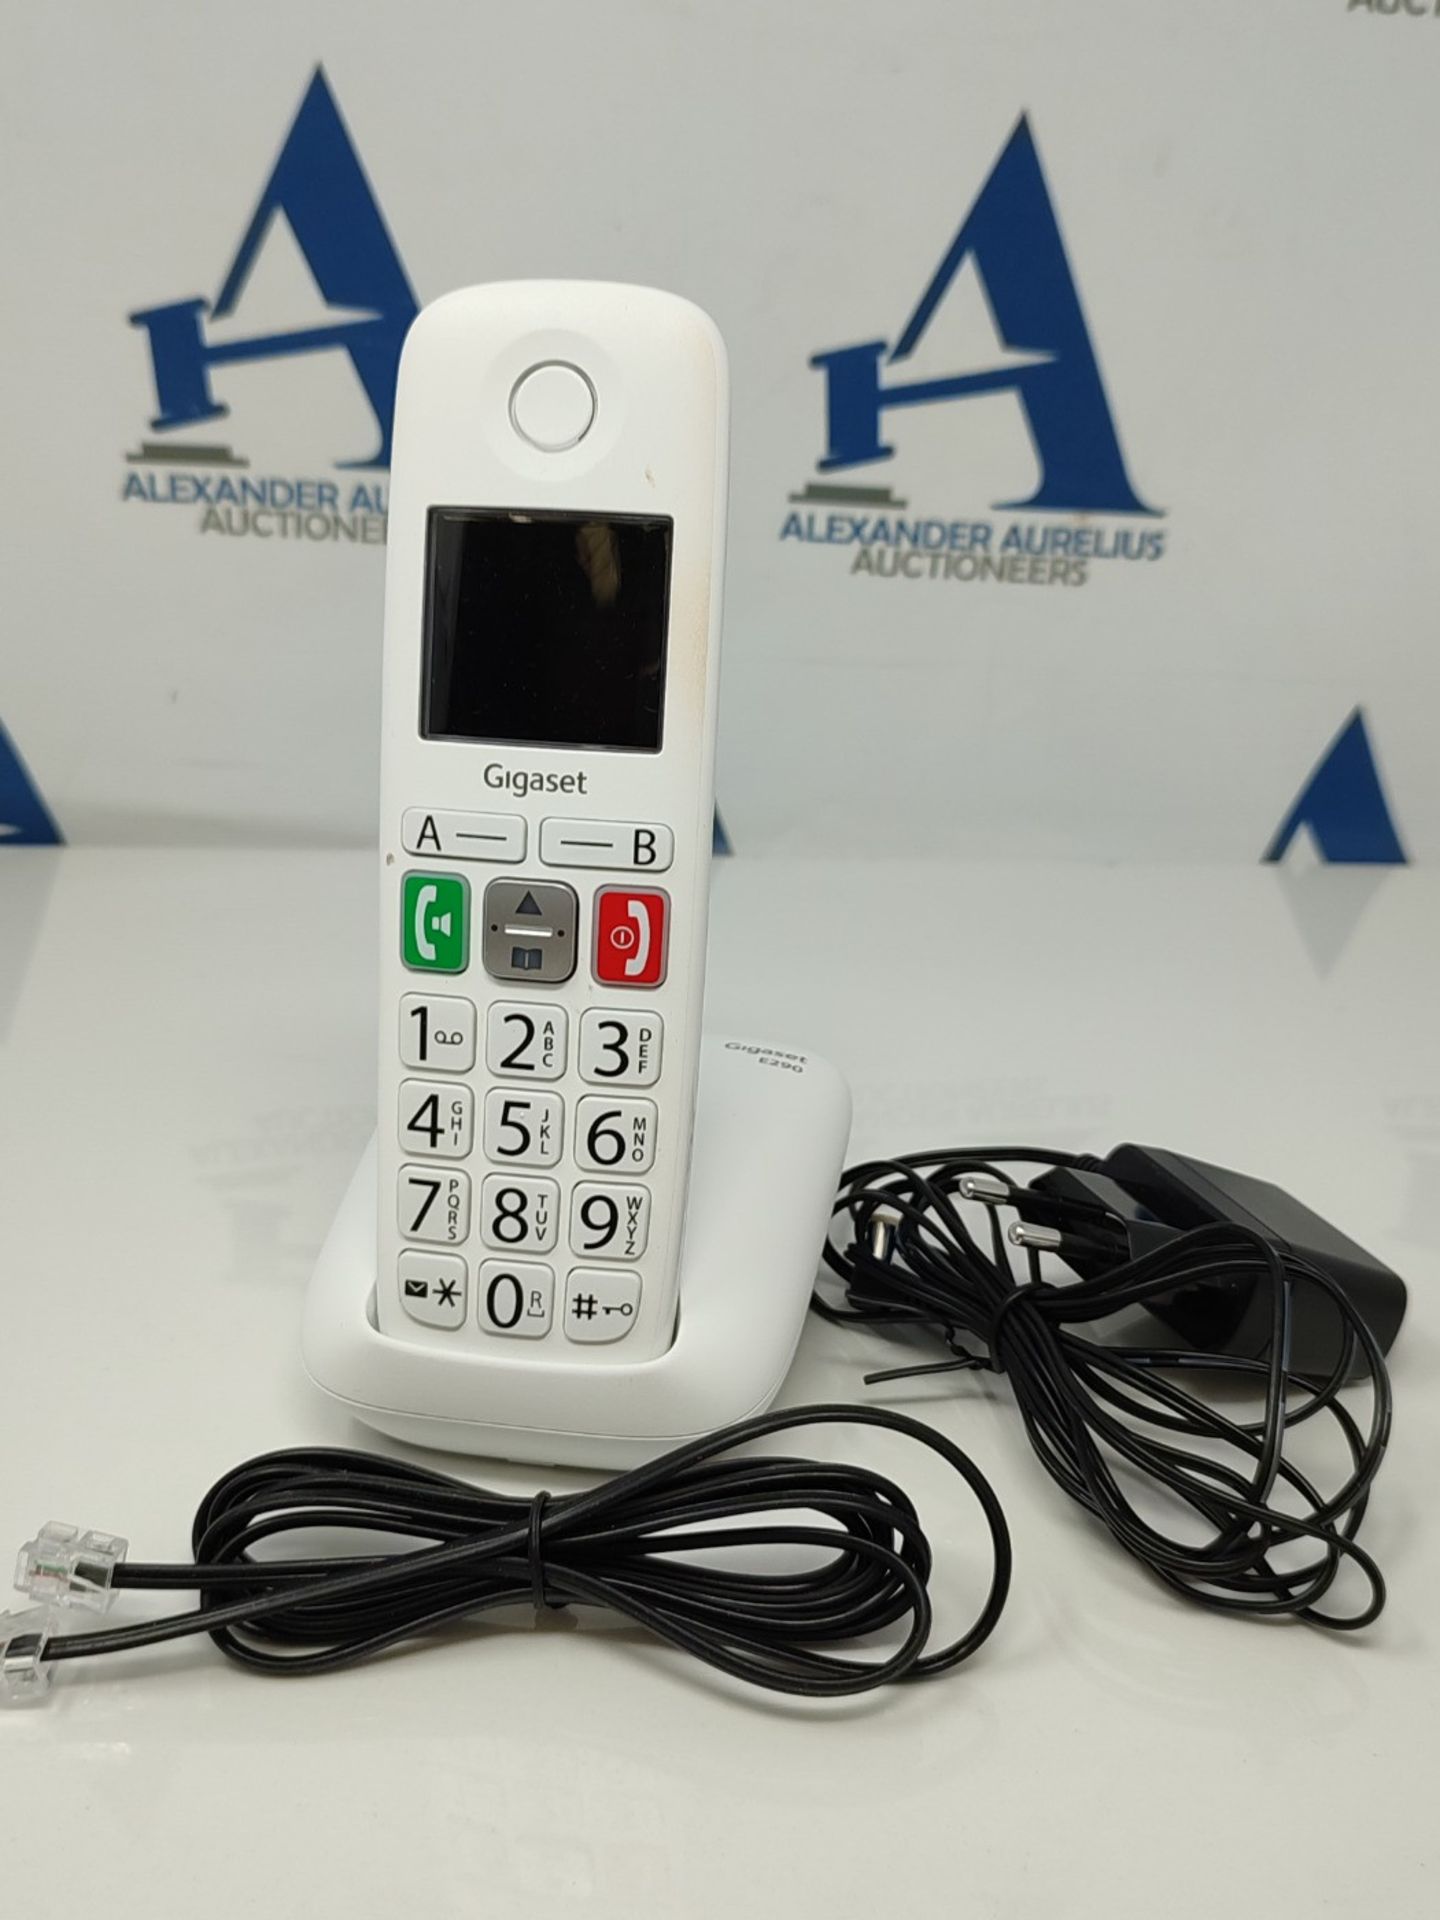 Gigaset E290 - Cordless phone for seniors with large keys, direct access keys for impo - Image 2 of 2